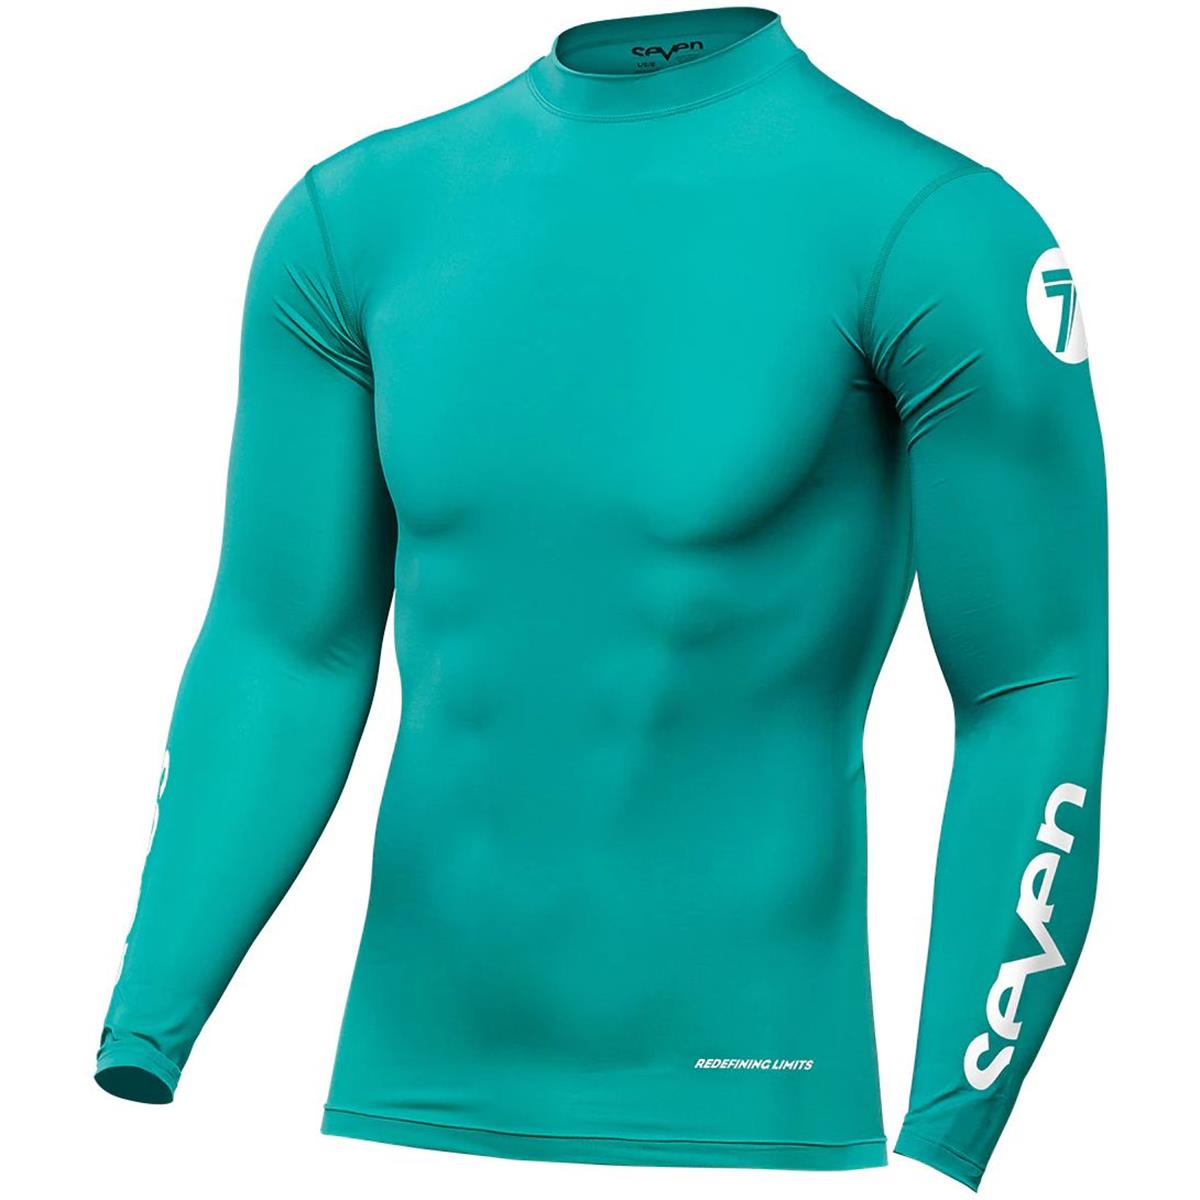 Seven MX Base Layer Top Longsleeve Zero Compression Turquoise